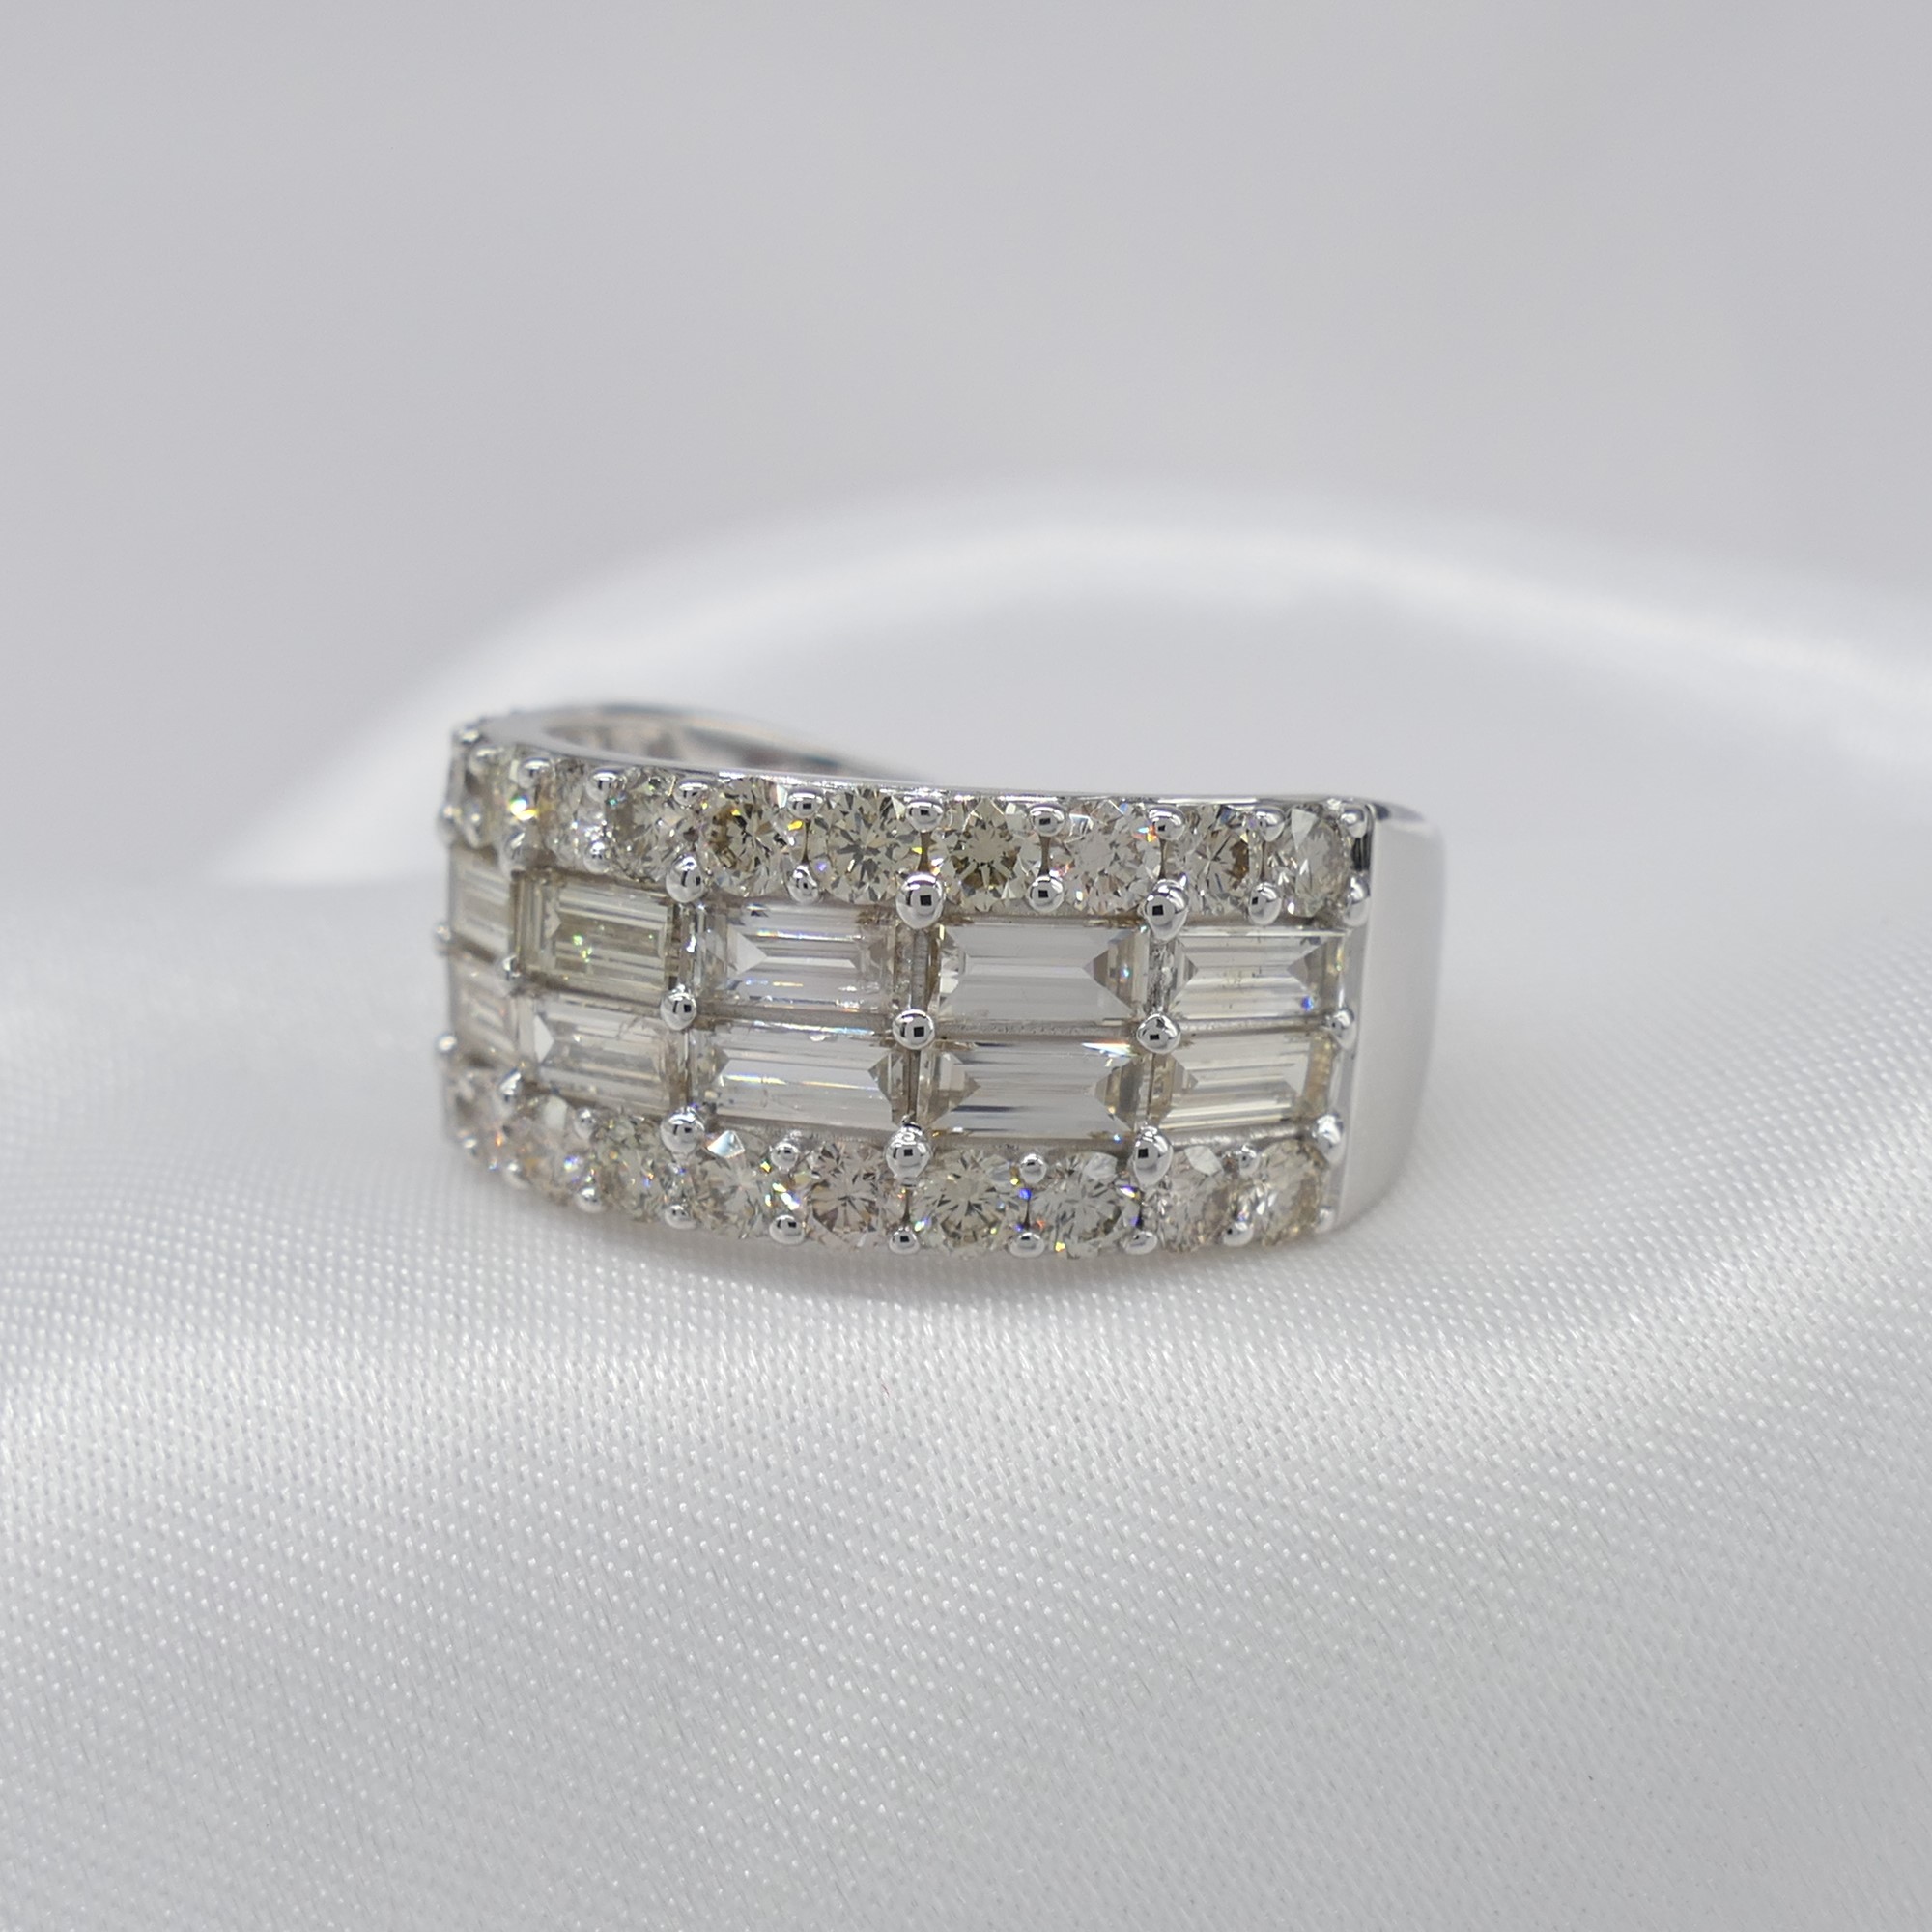 2.72 Carat Round Brilliant-Cut and Baguette-Cut Diamond Cocktail Ring - Image 4 of 6